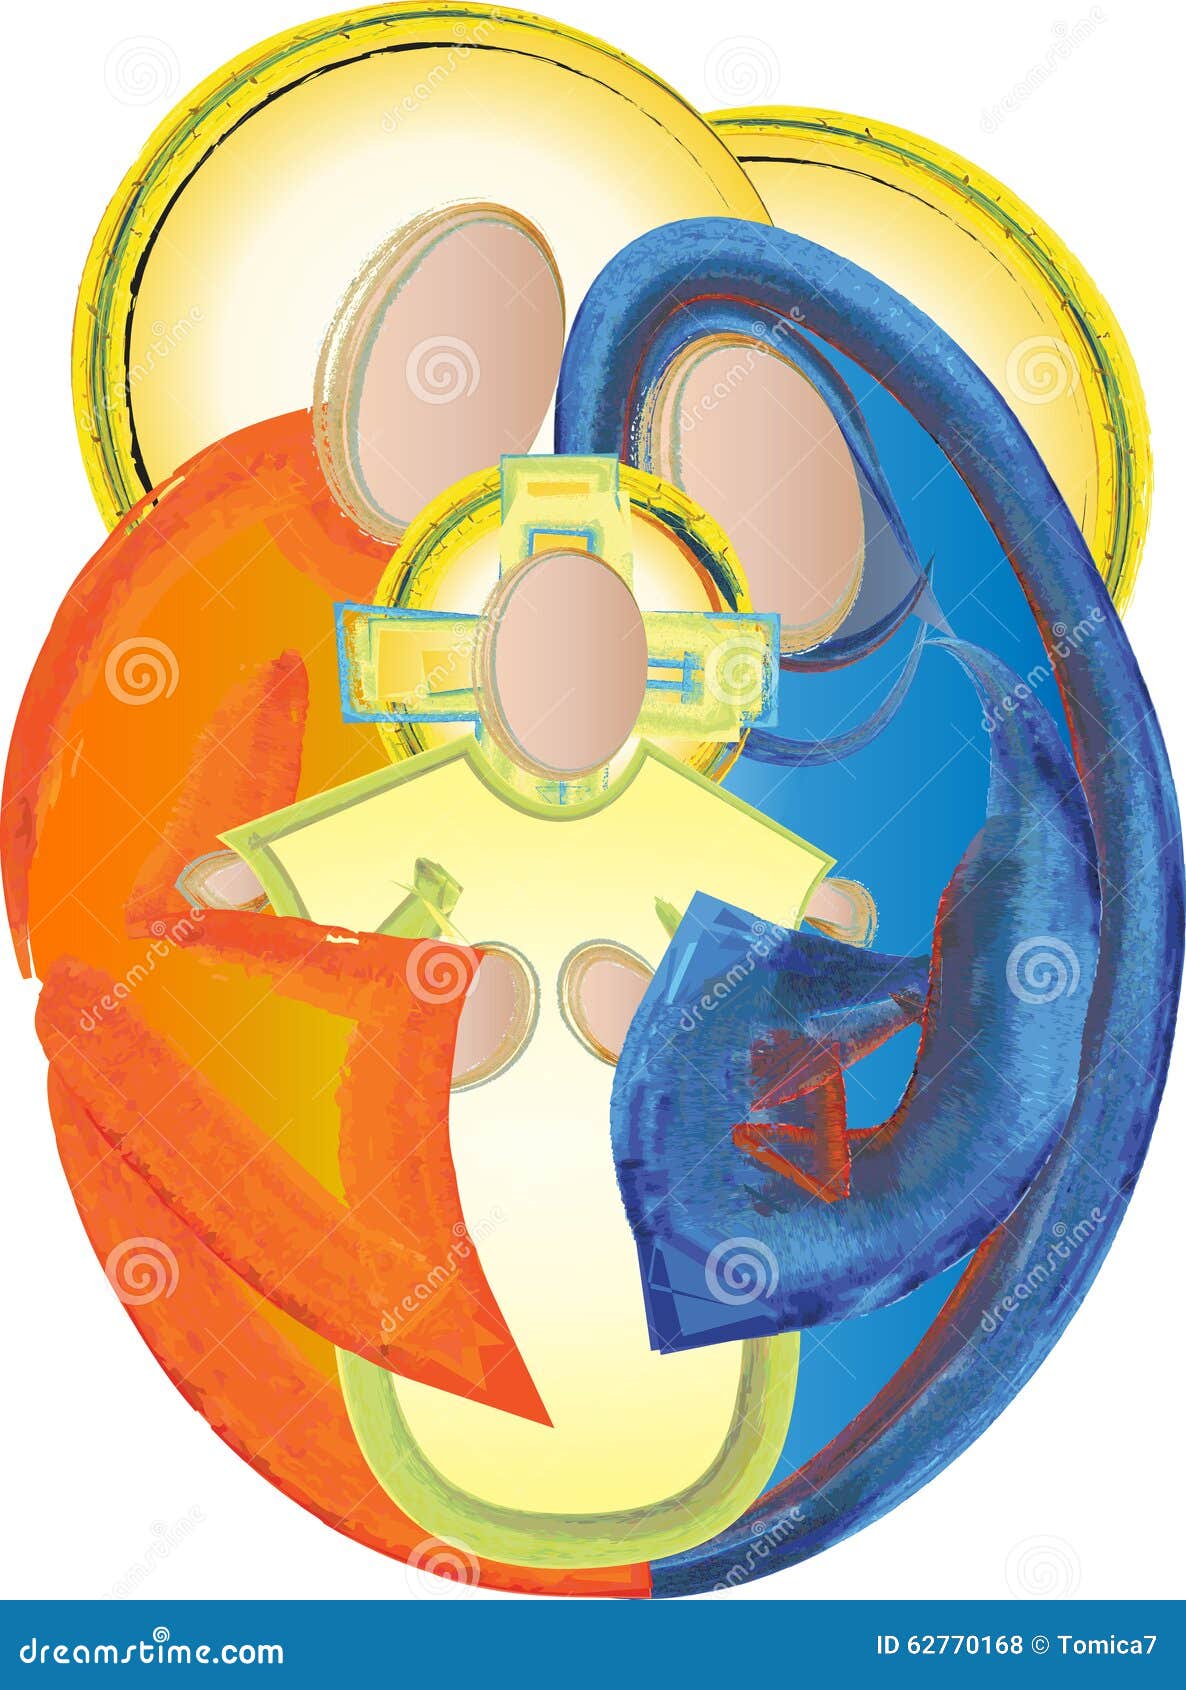 holy family clipart images - photo #31